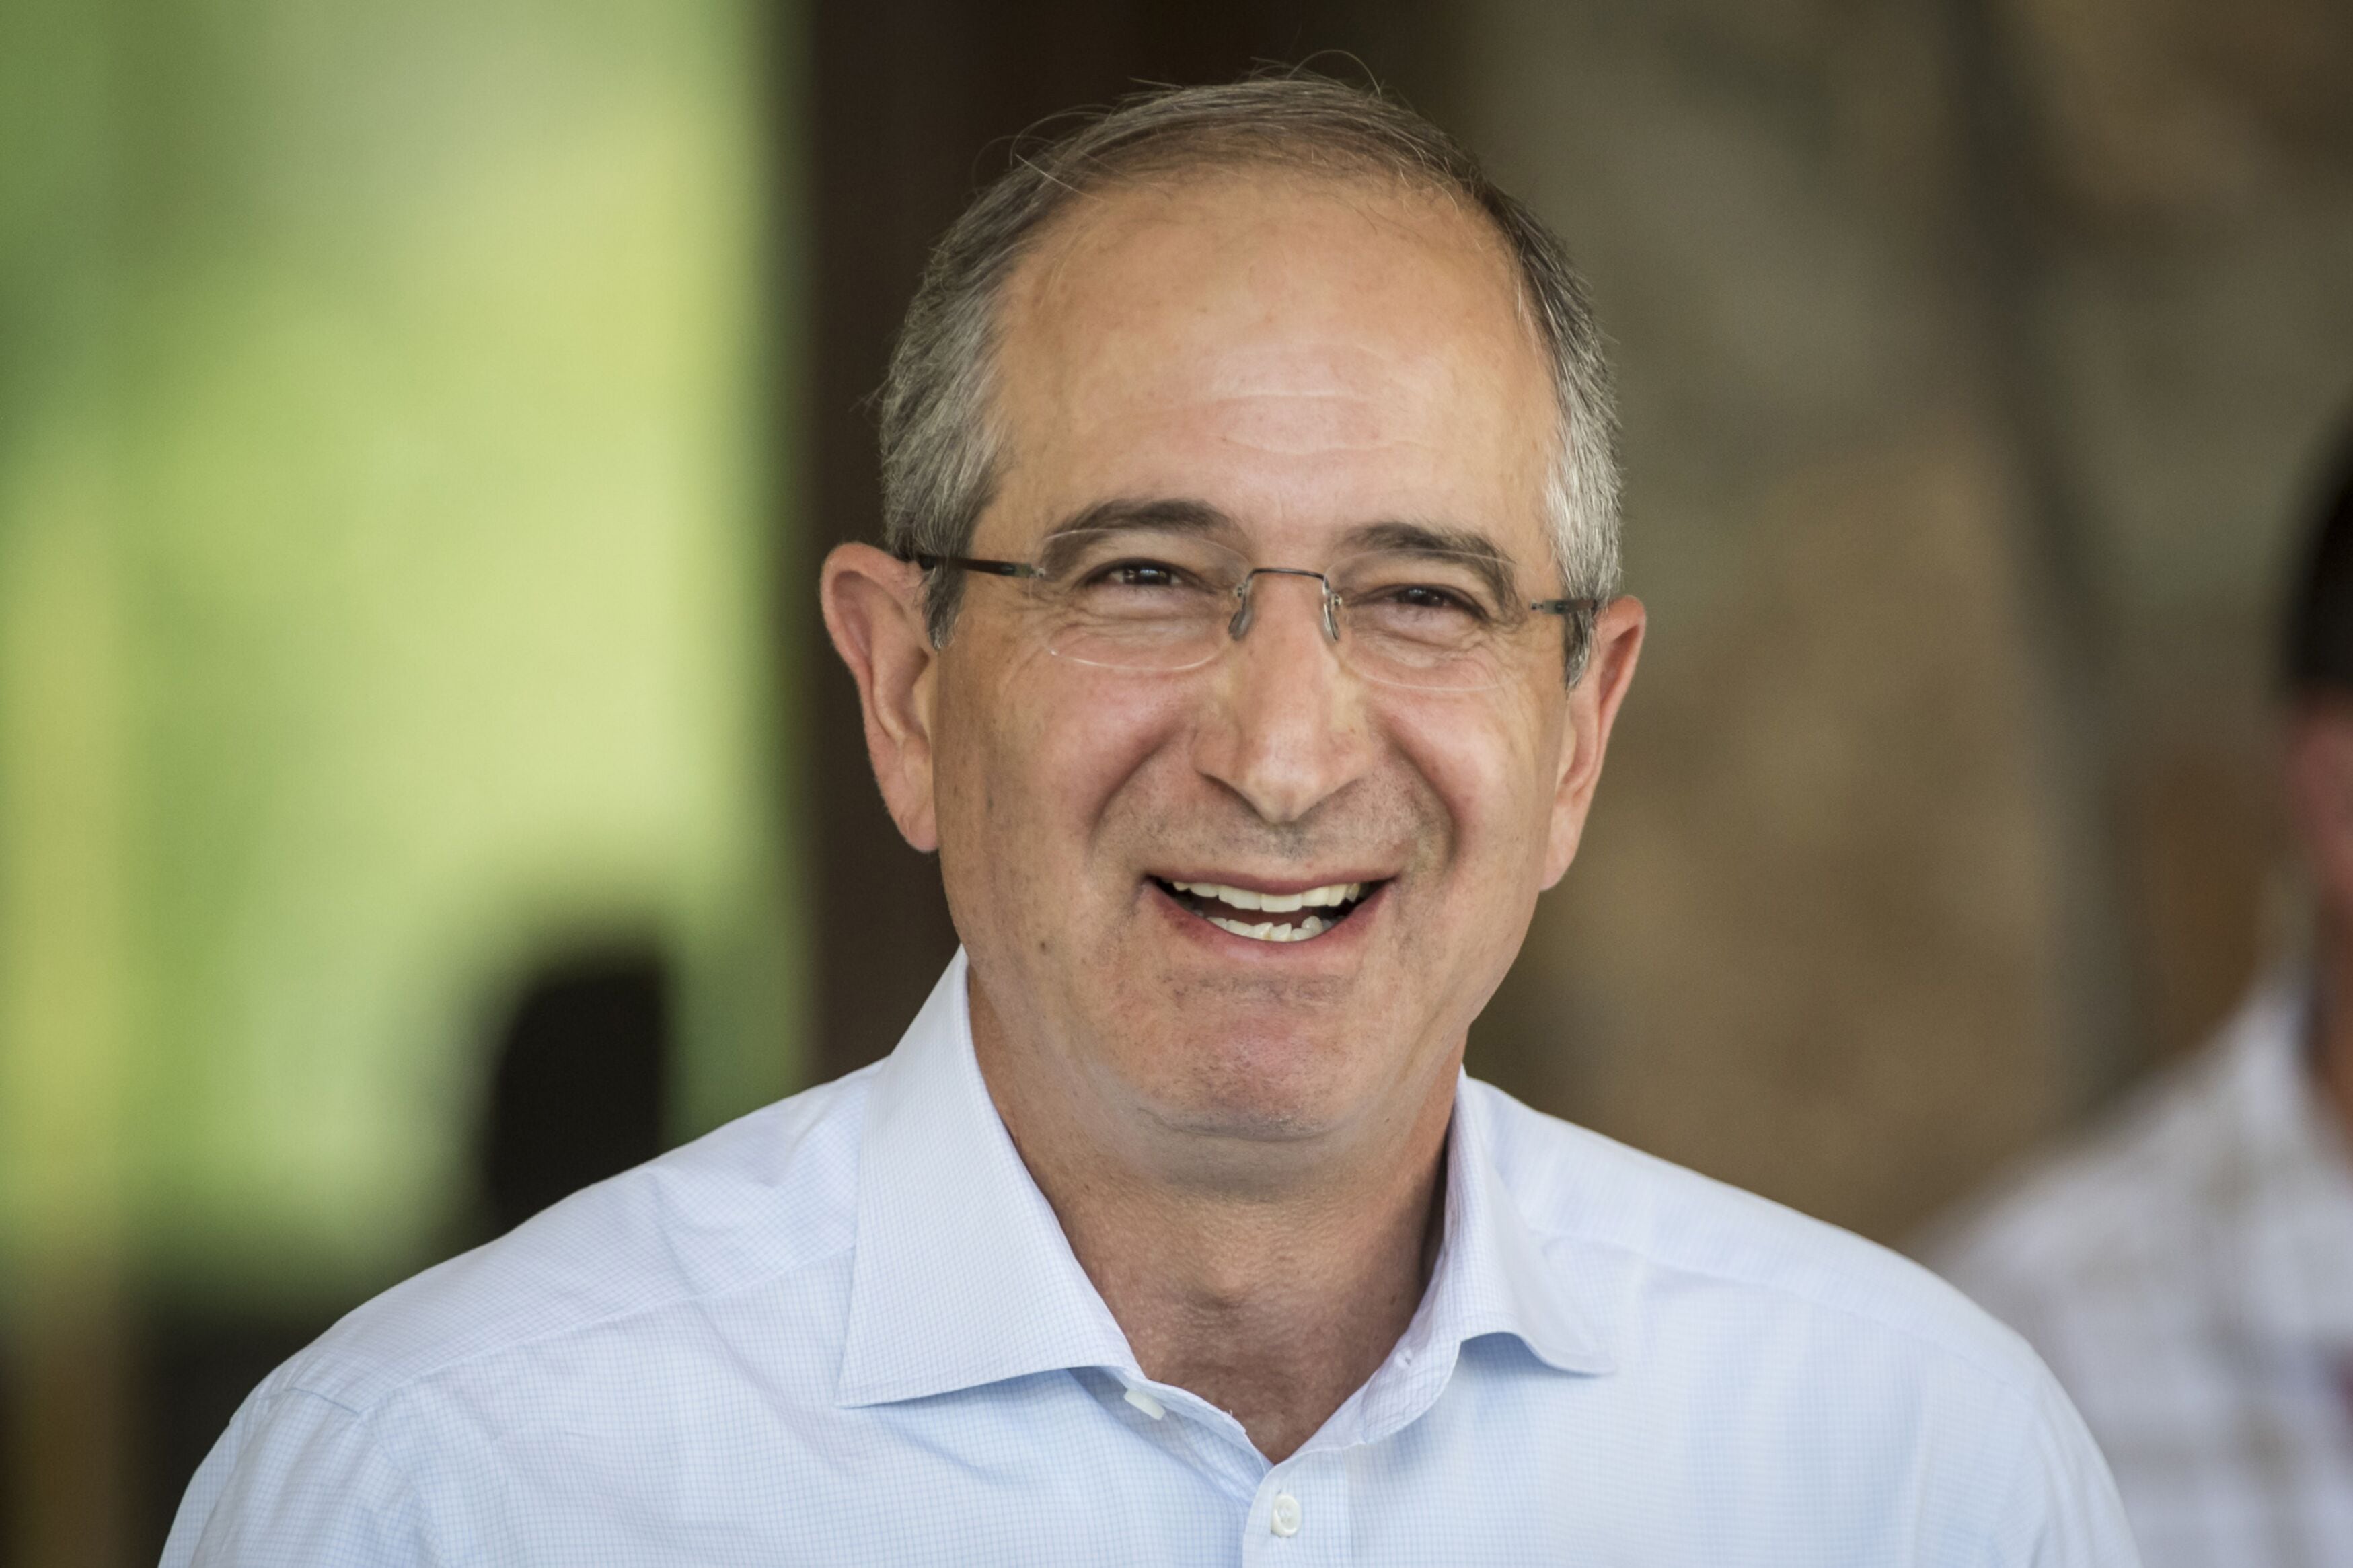 Comcast CEO Brian Roberts' salary: $32.1 million in 2022